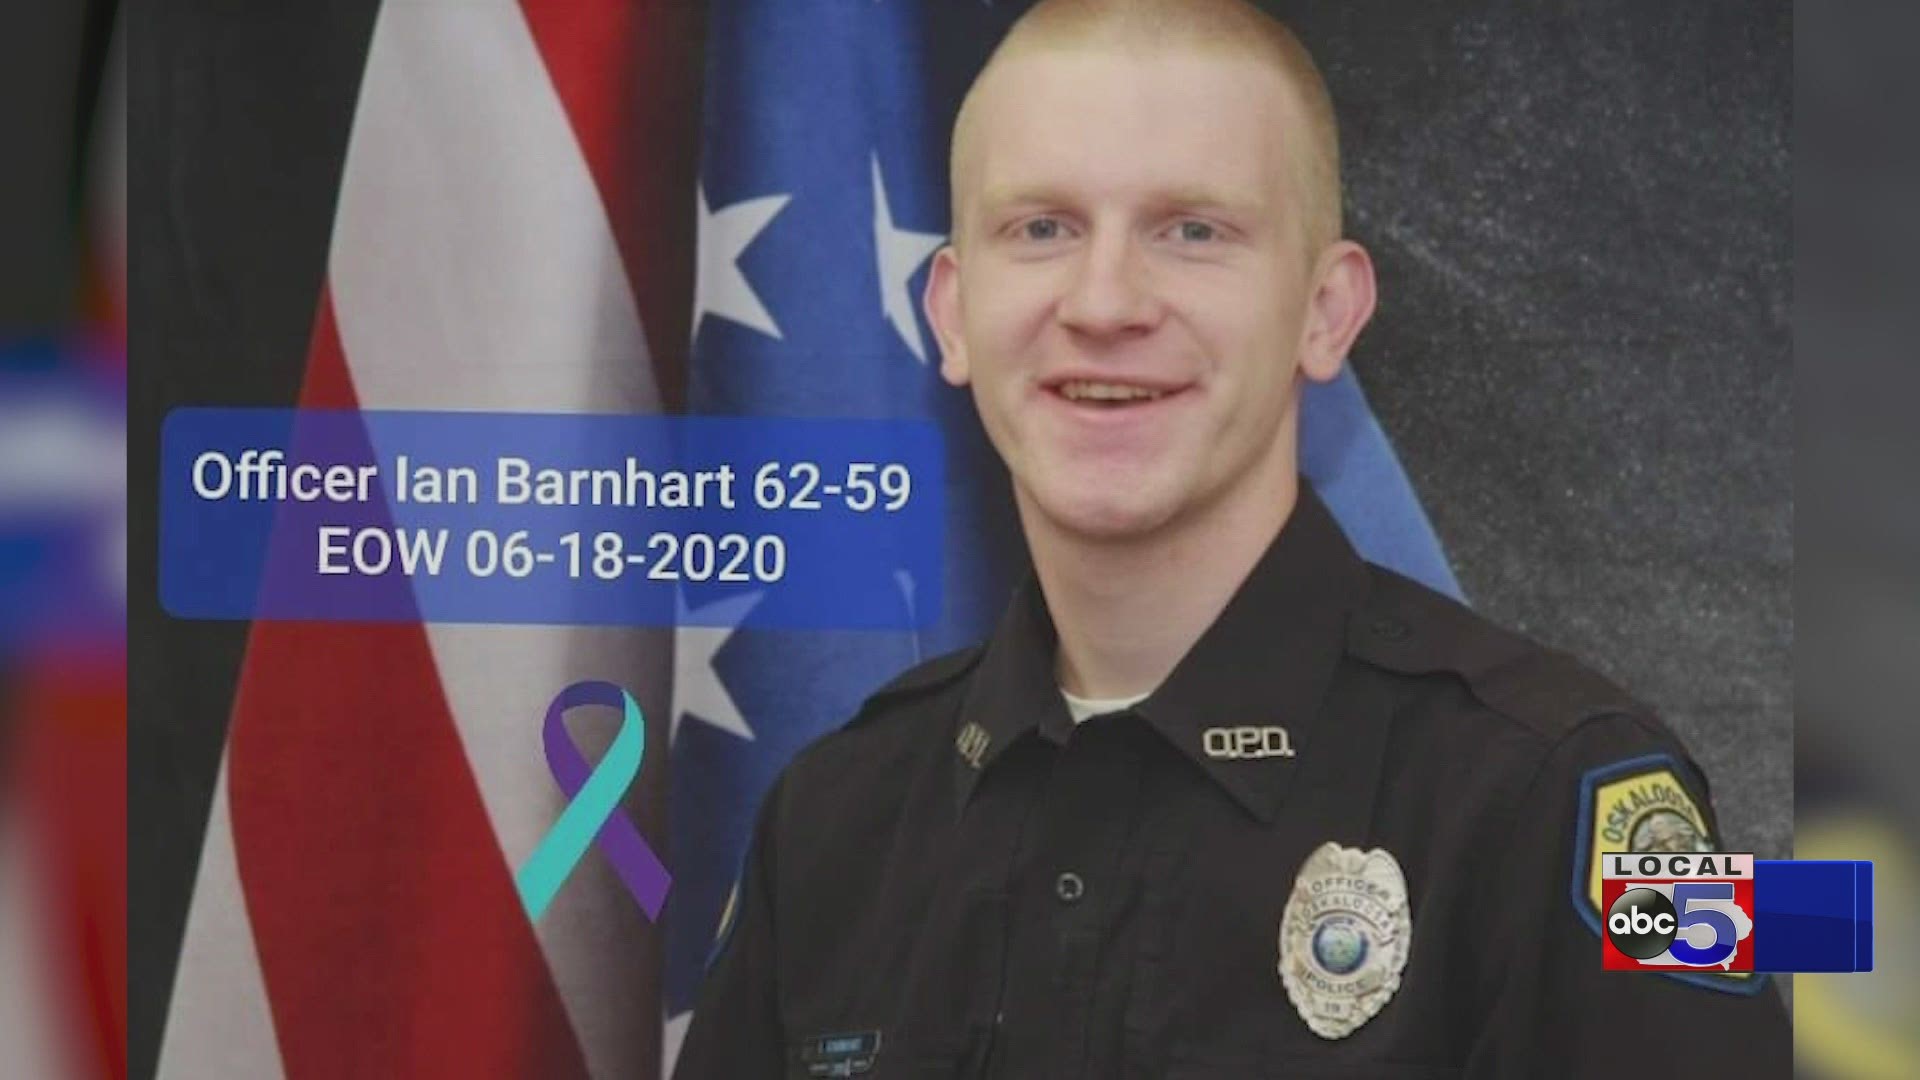 Oskaloosa Police Officer Ian Barnhart was found dead on Thursday, in what the Mahaska County Sheriff's Office is ruling a suicide.